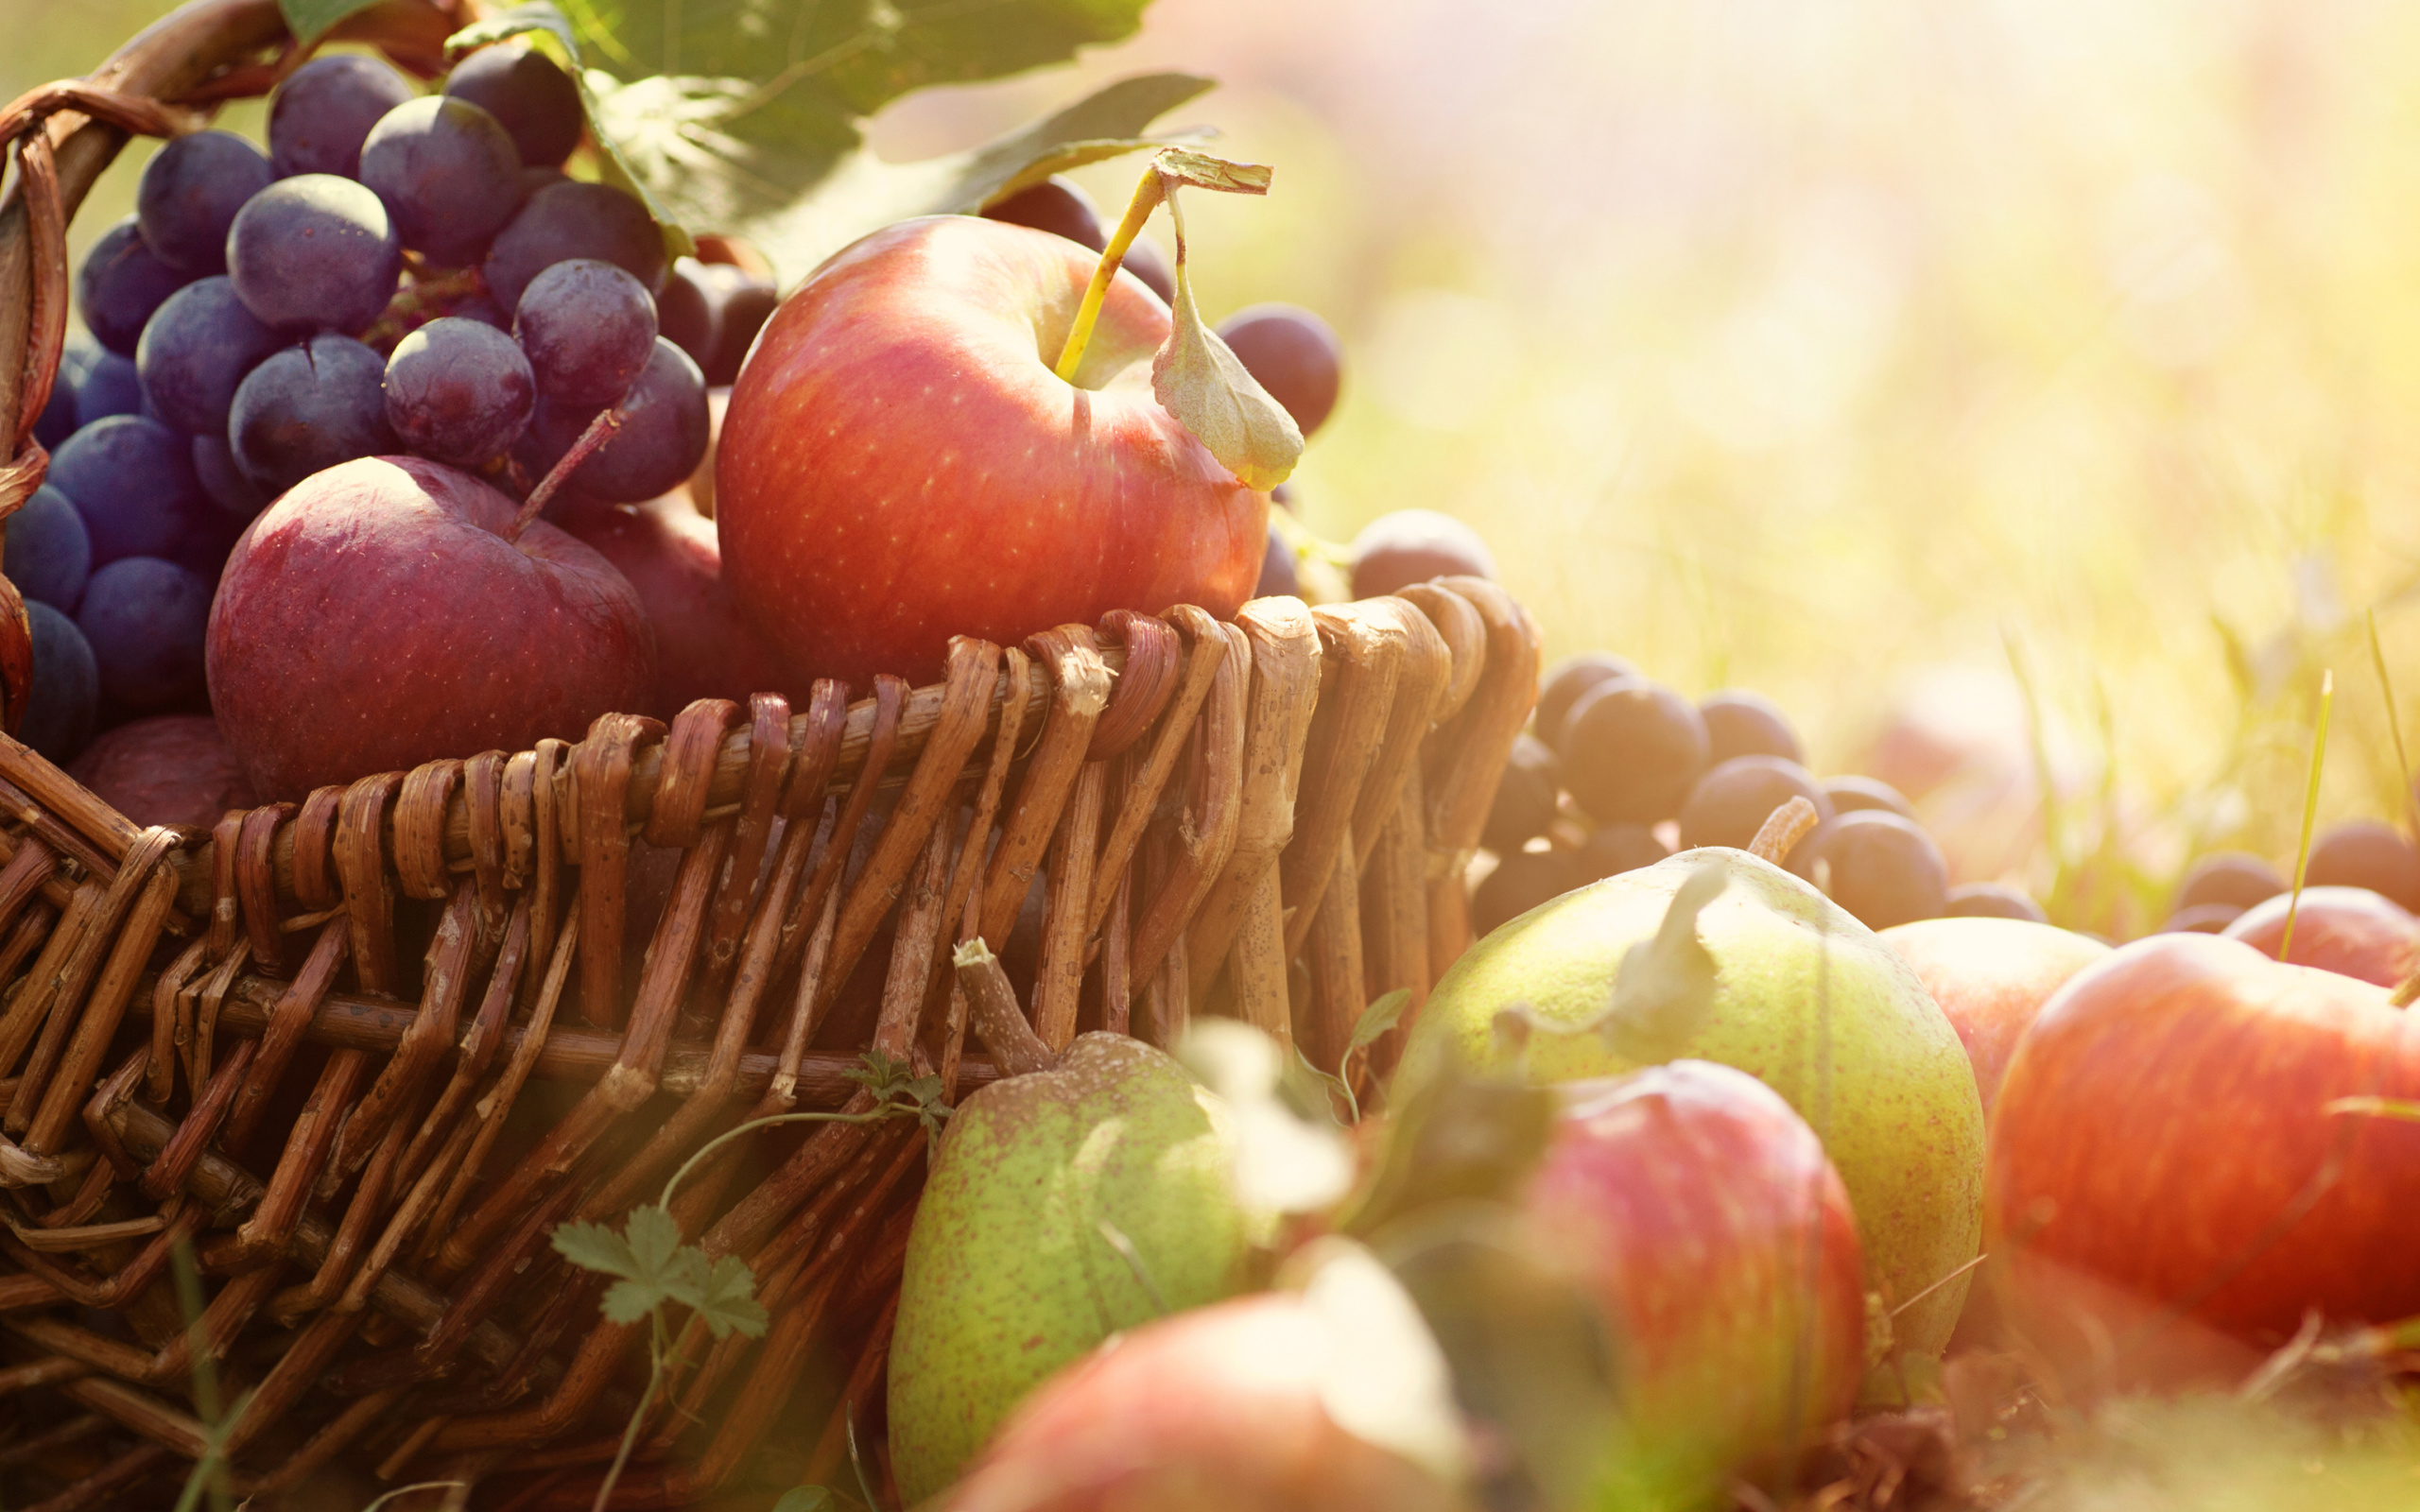 Apples and Grapes wallpaper 2560x1600